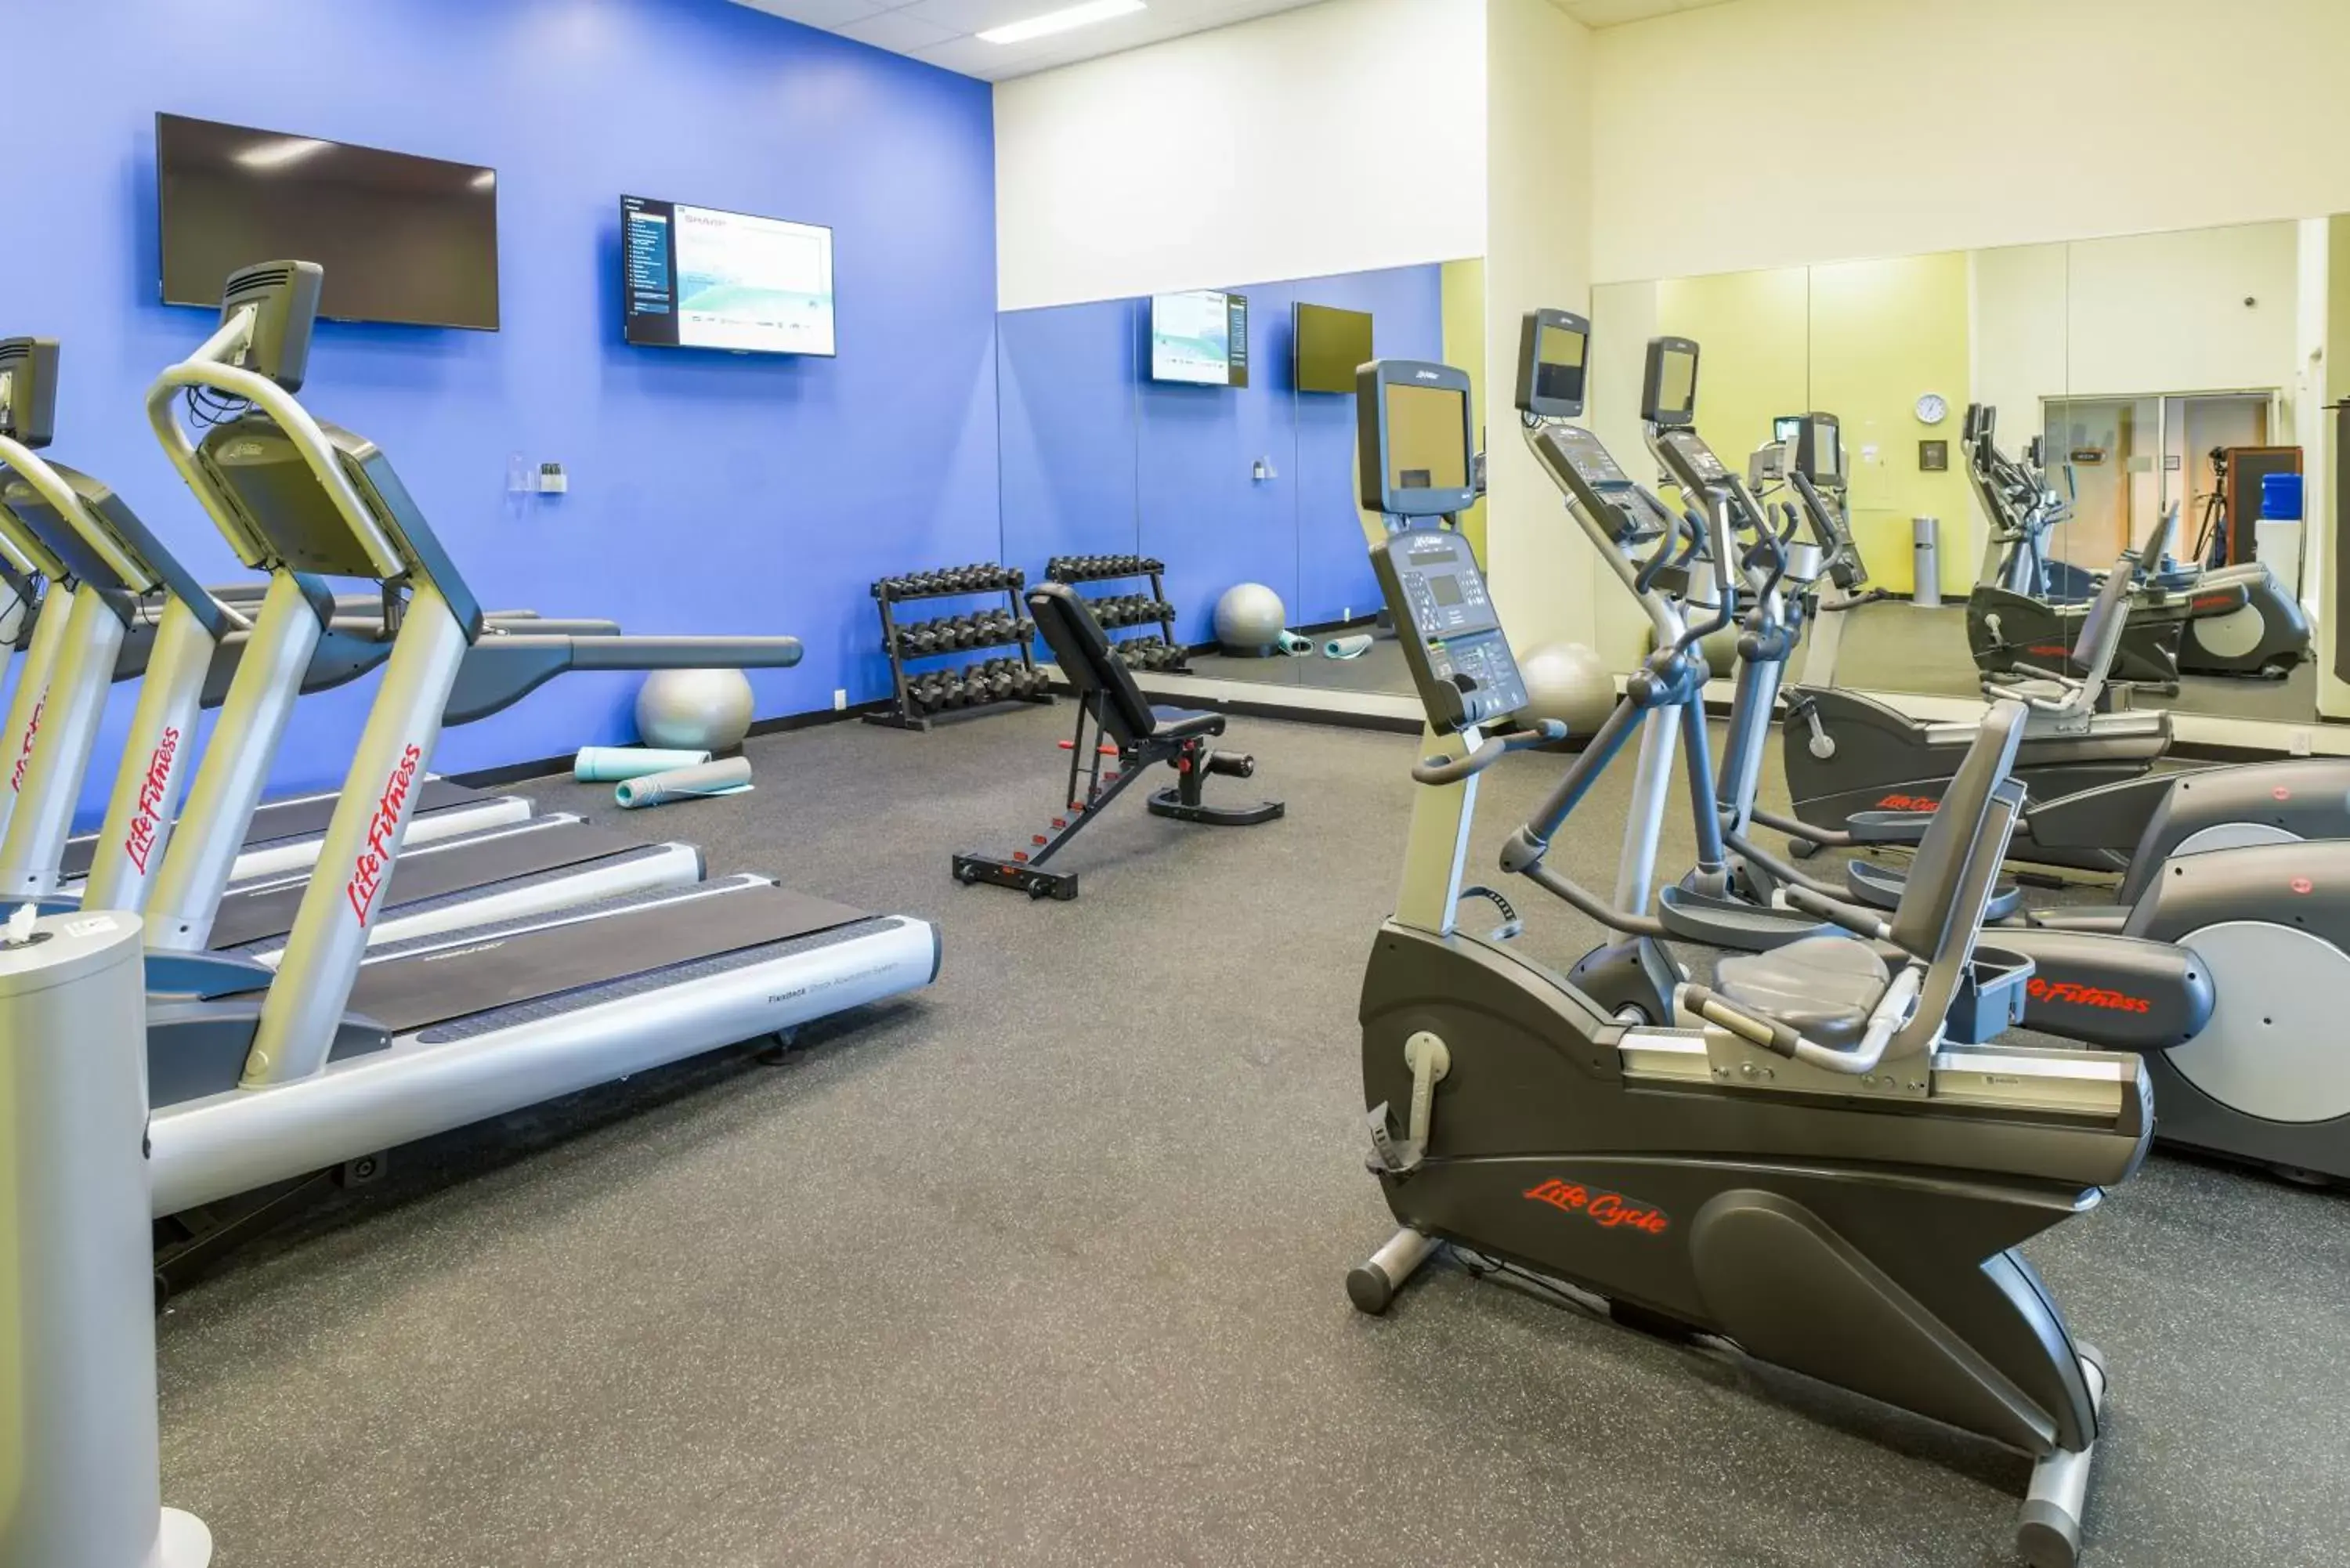 Fitness centre/facilities, Fitness Center/Facilities in Tioga Downs Casino and Resort